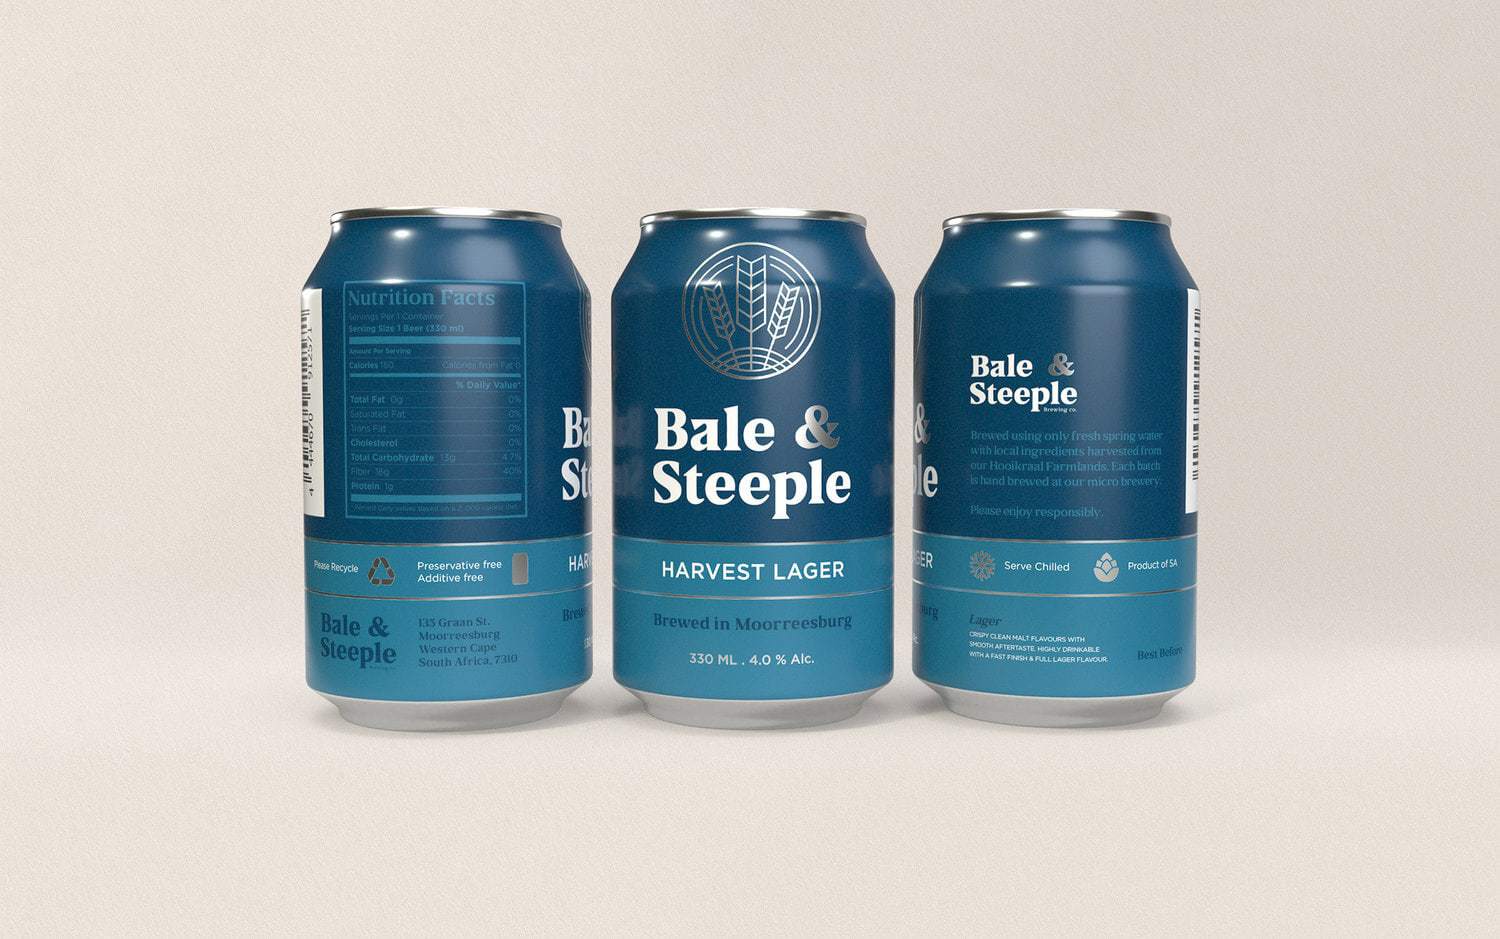 Branding and Packaging for Bale & Steeple Brewing Co.